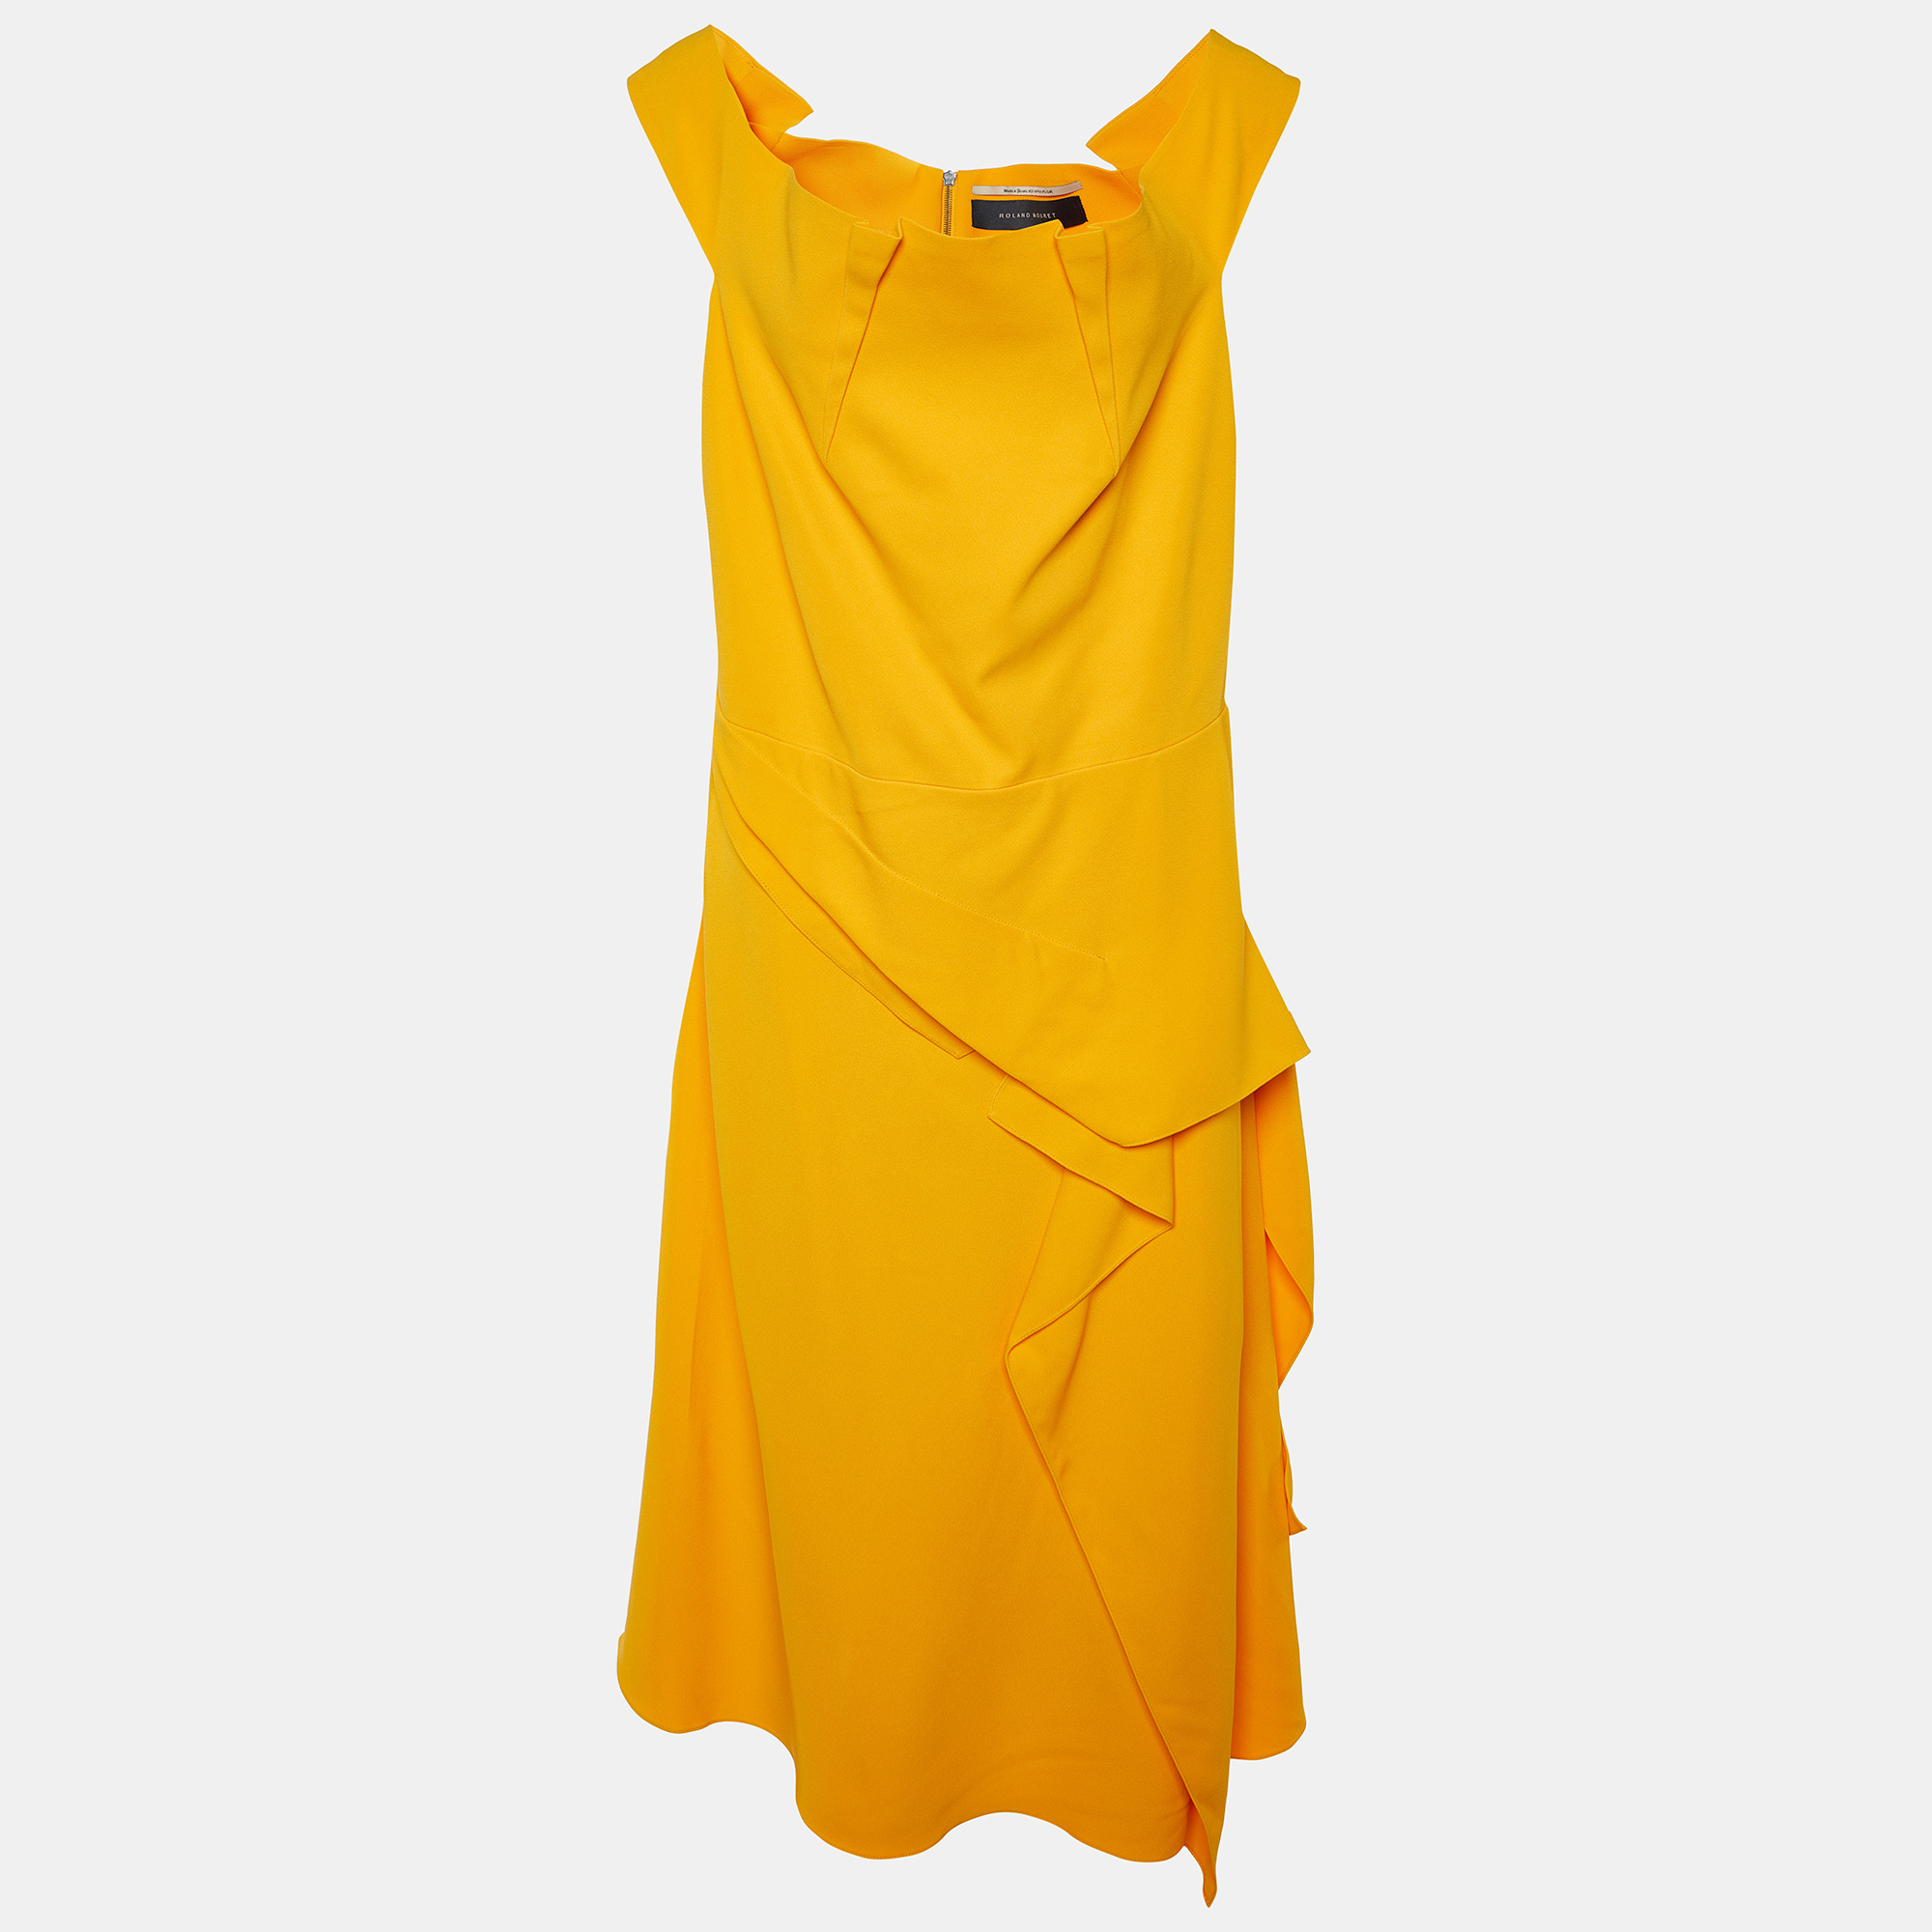 Exhibit a stylish look by wearing this beautiful designer dress. Tailored using fine fabric this dress has a chic silhouette for a framing fit. Style the creation with chic accessories and pumps.